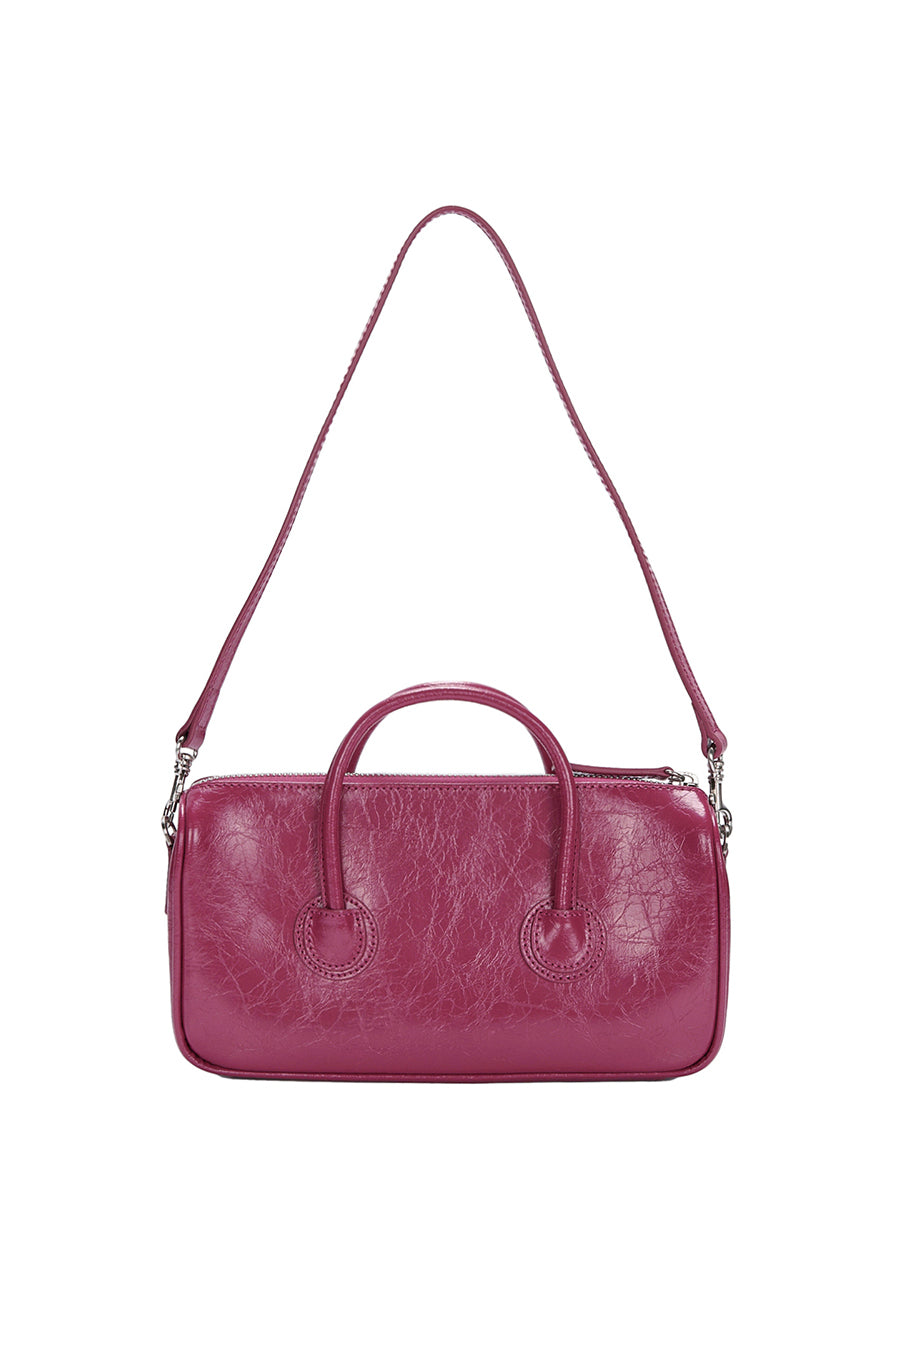 Marge-Sherwood-Zipper-Small-Bag-Berry-Pink-Crinkle